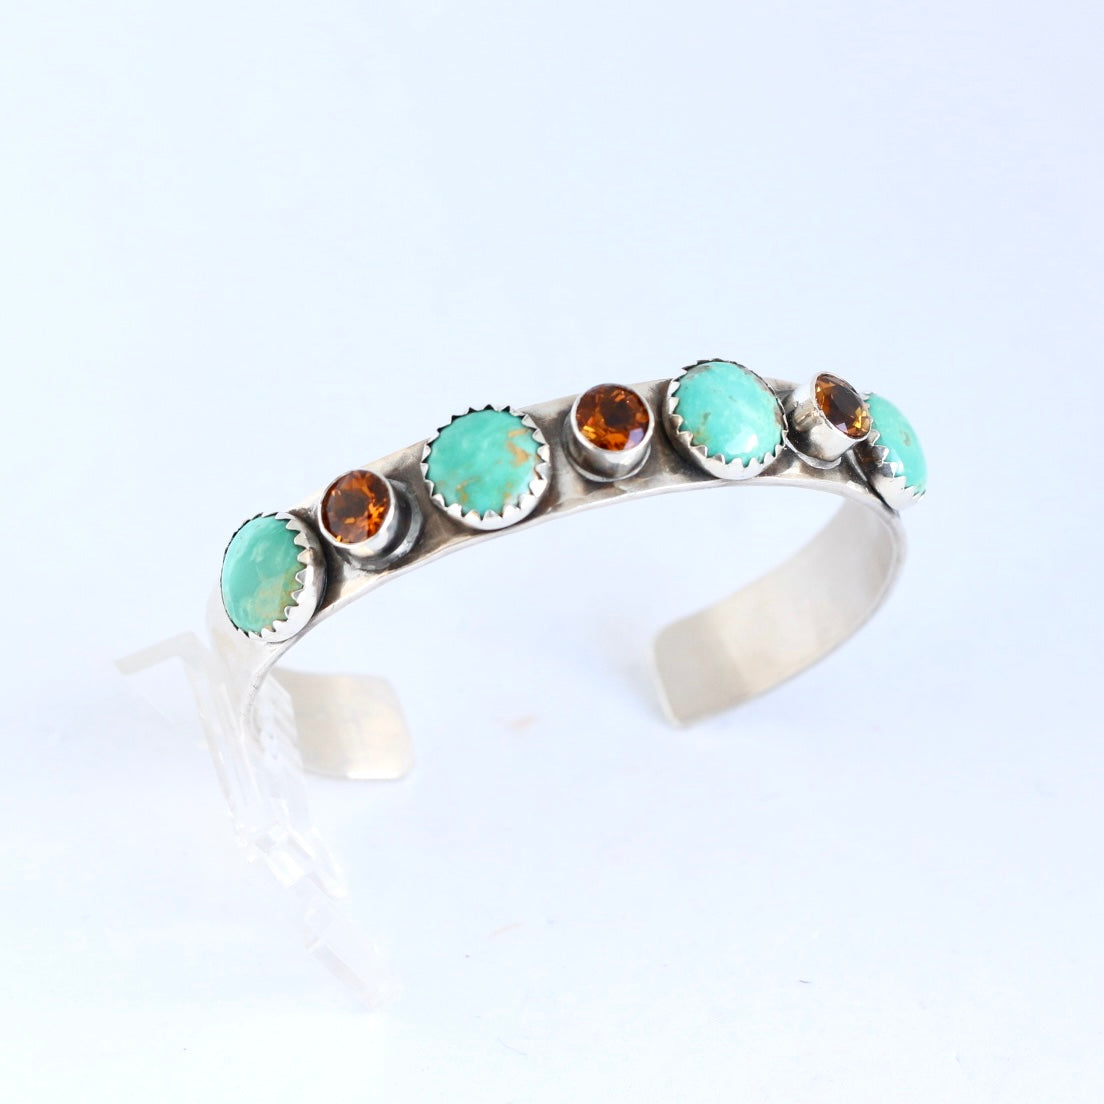 10MM Sterling Cuff with Turquoise and Citrine Cuffs Richard Schmidt   